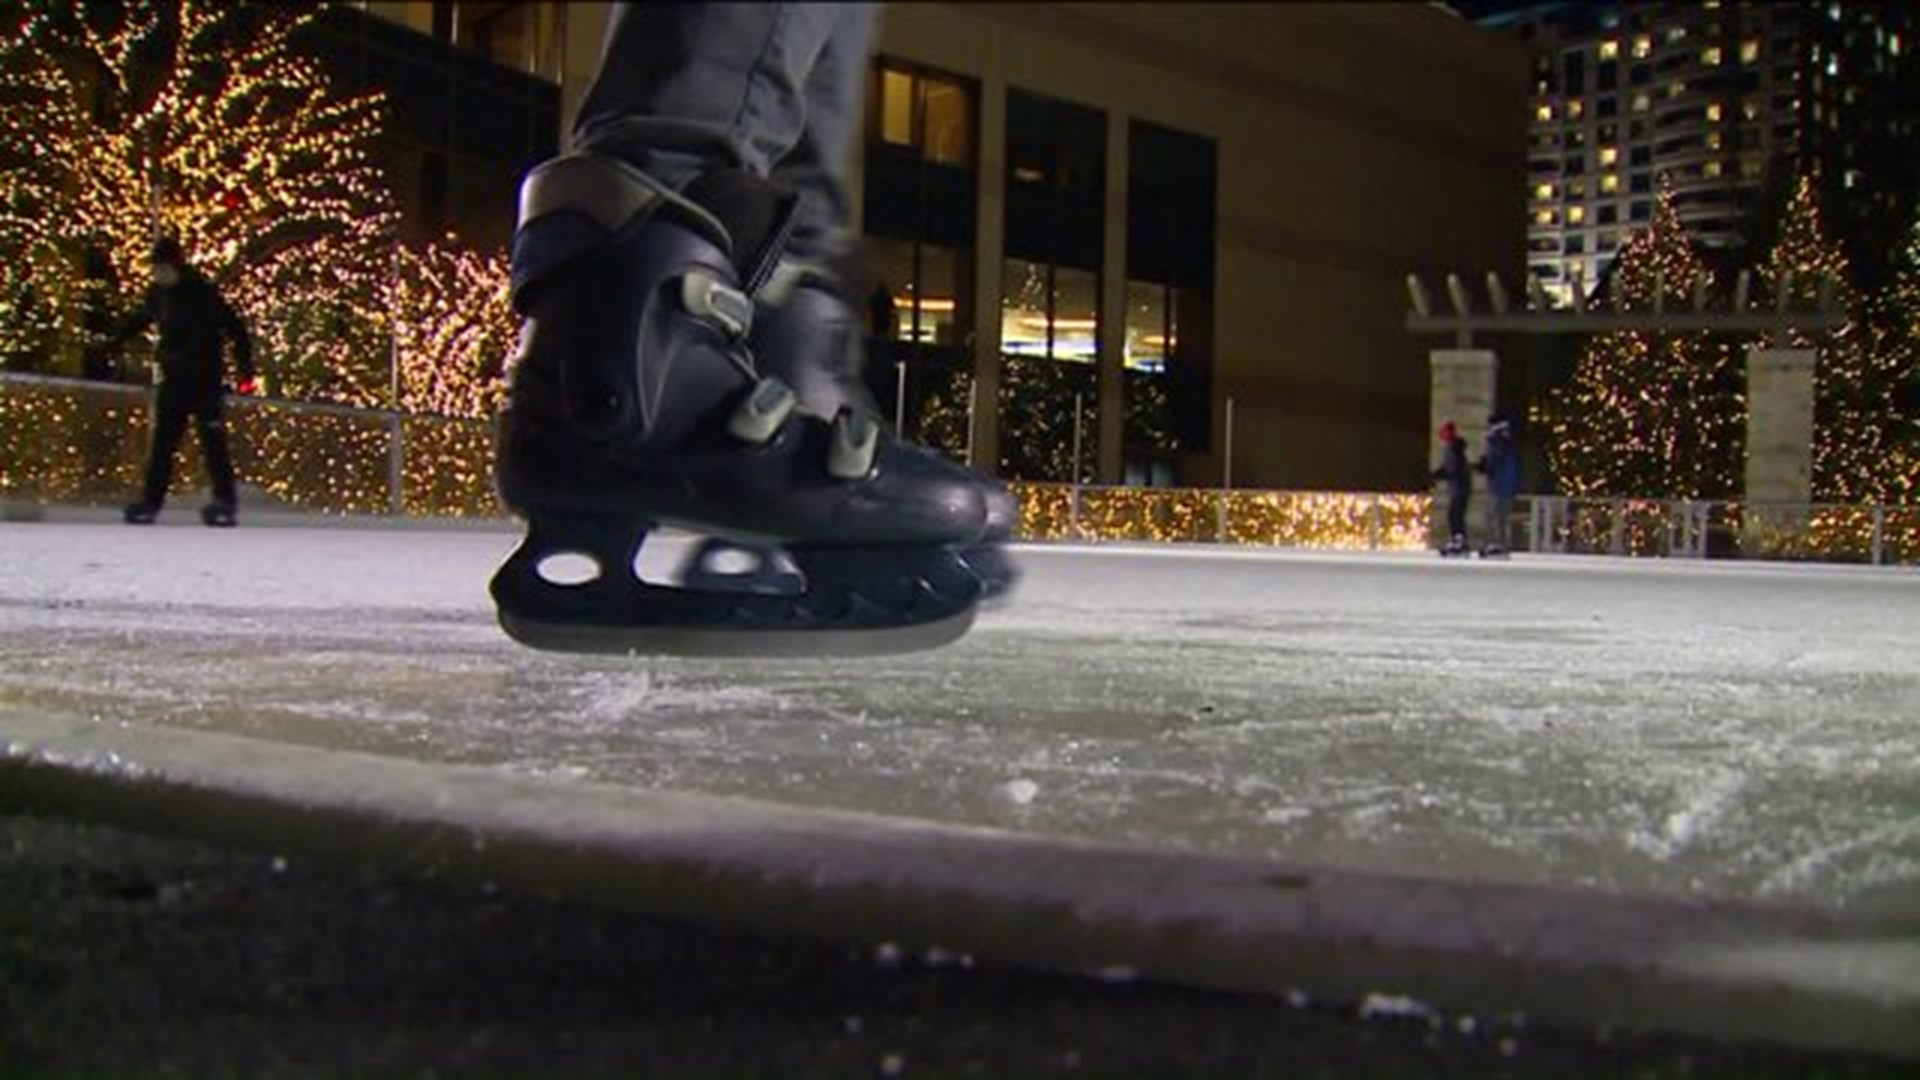 Ice skating at Foxwoods is a new familiy attraction